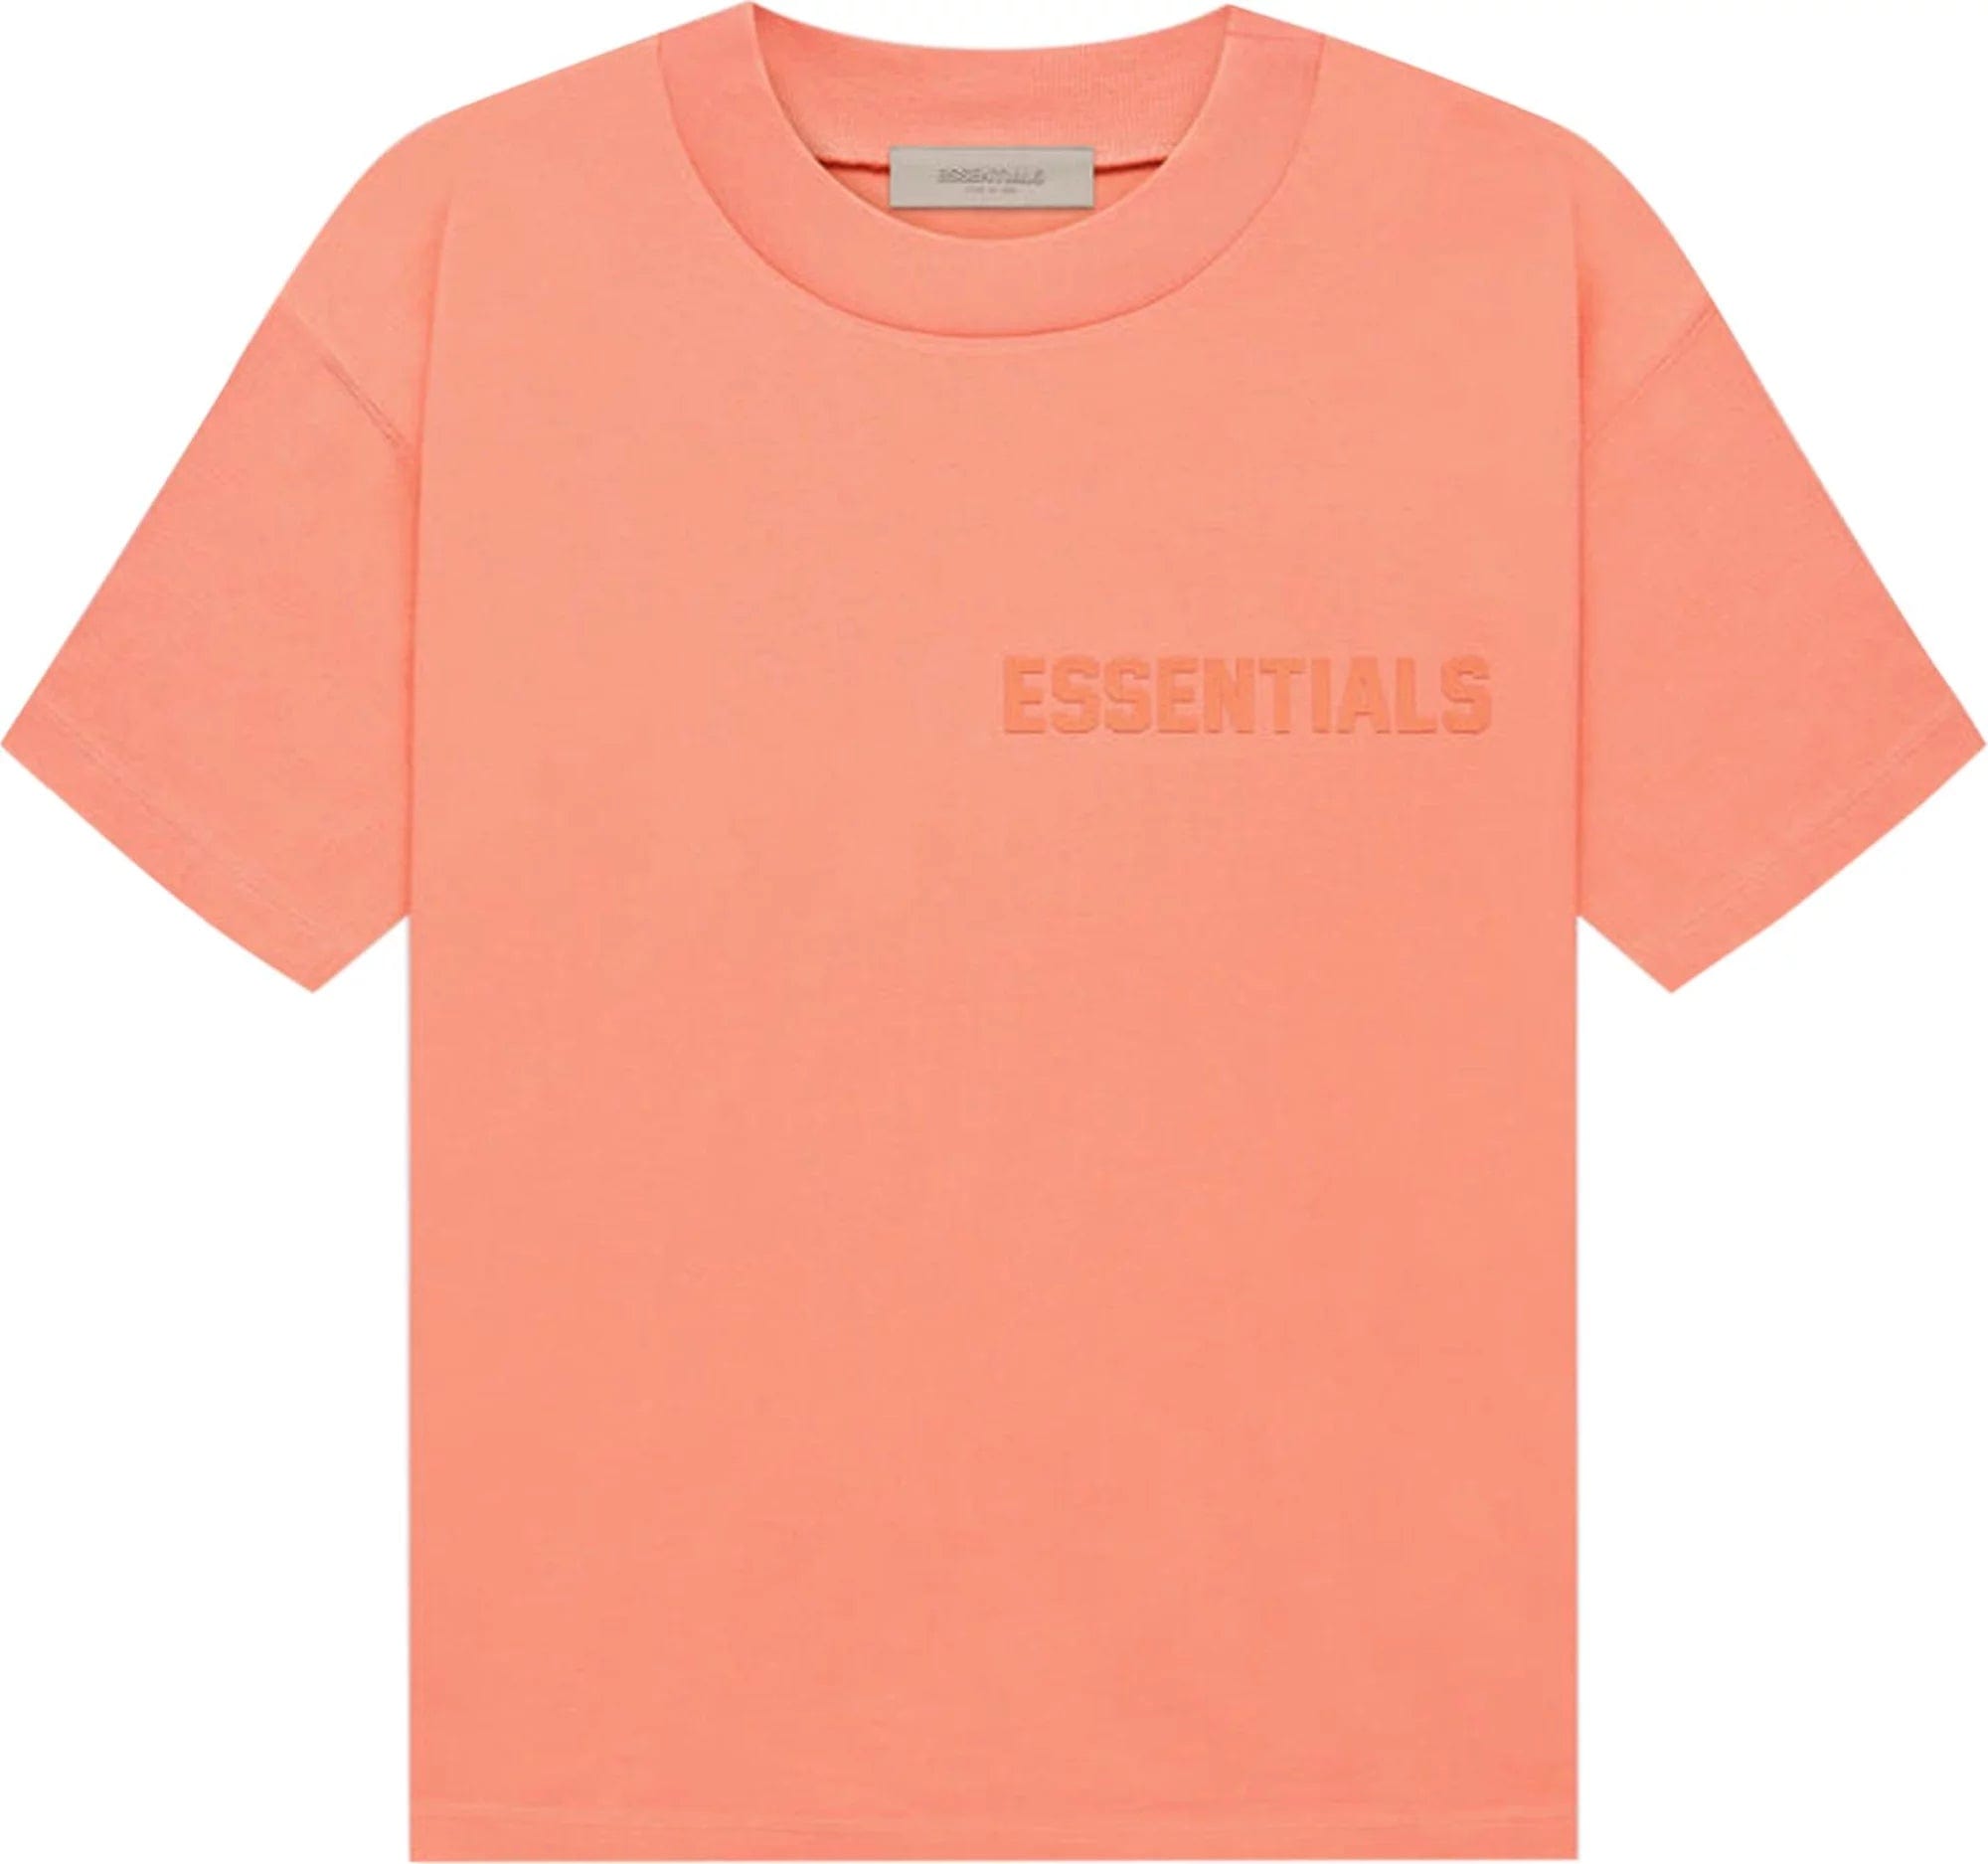 Fear of God Essentials Short-Sleeve Tee Coral